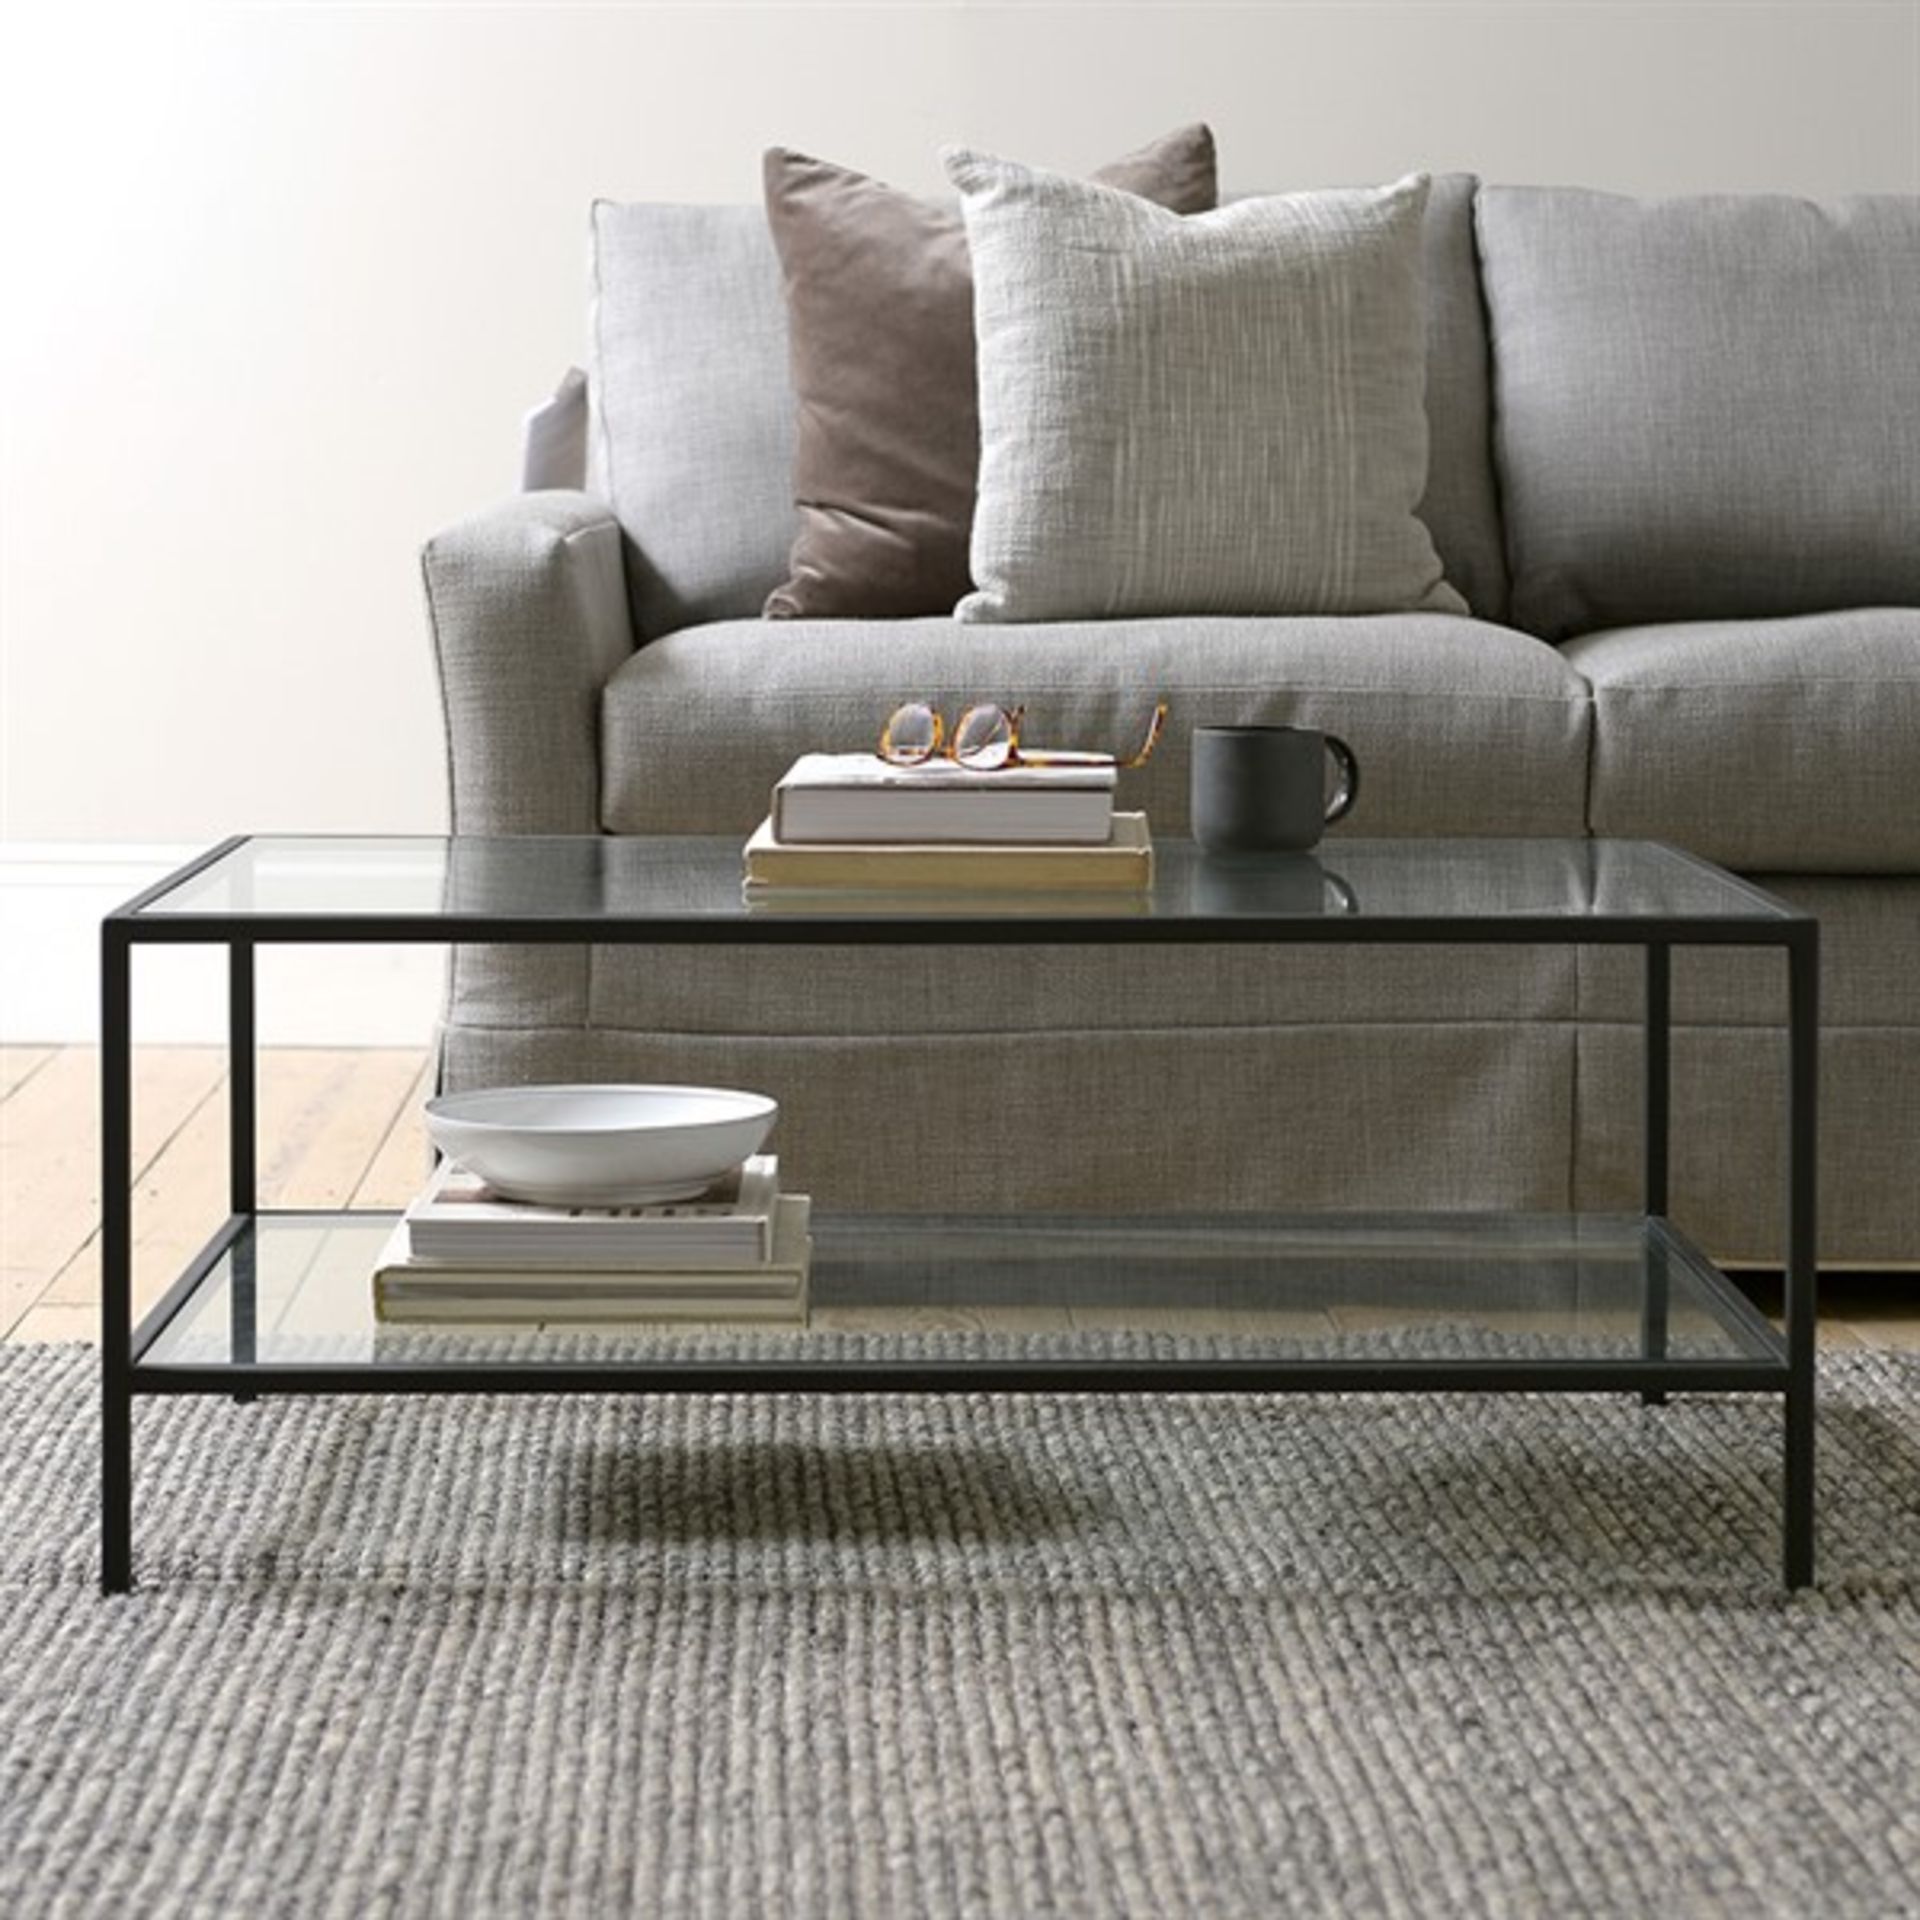 Cotswold Company Foxcote Metal and Glass Coffee Table RRP Â£325.00 - The items in this lot are